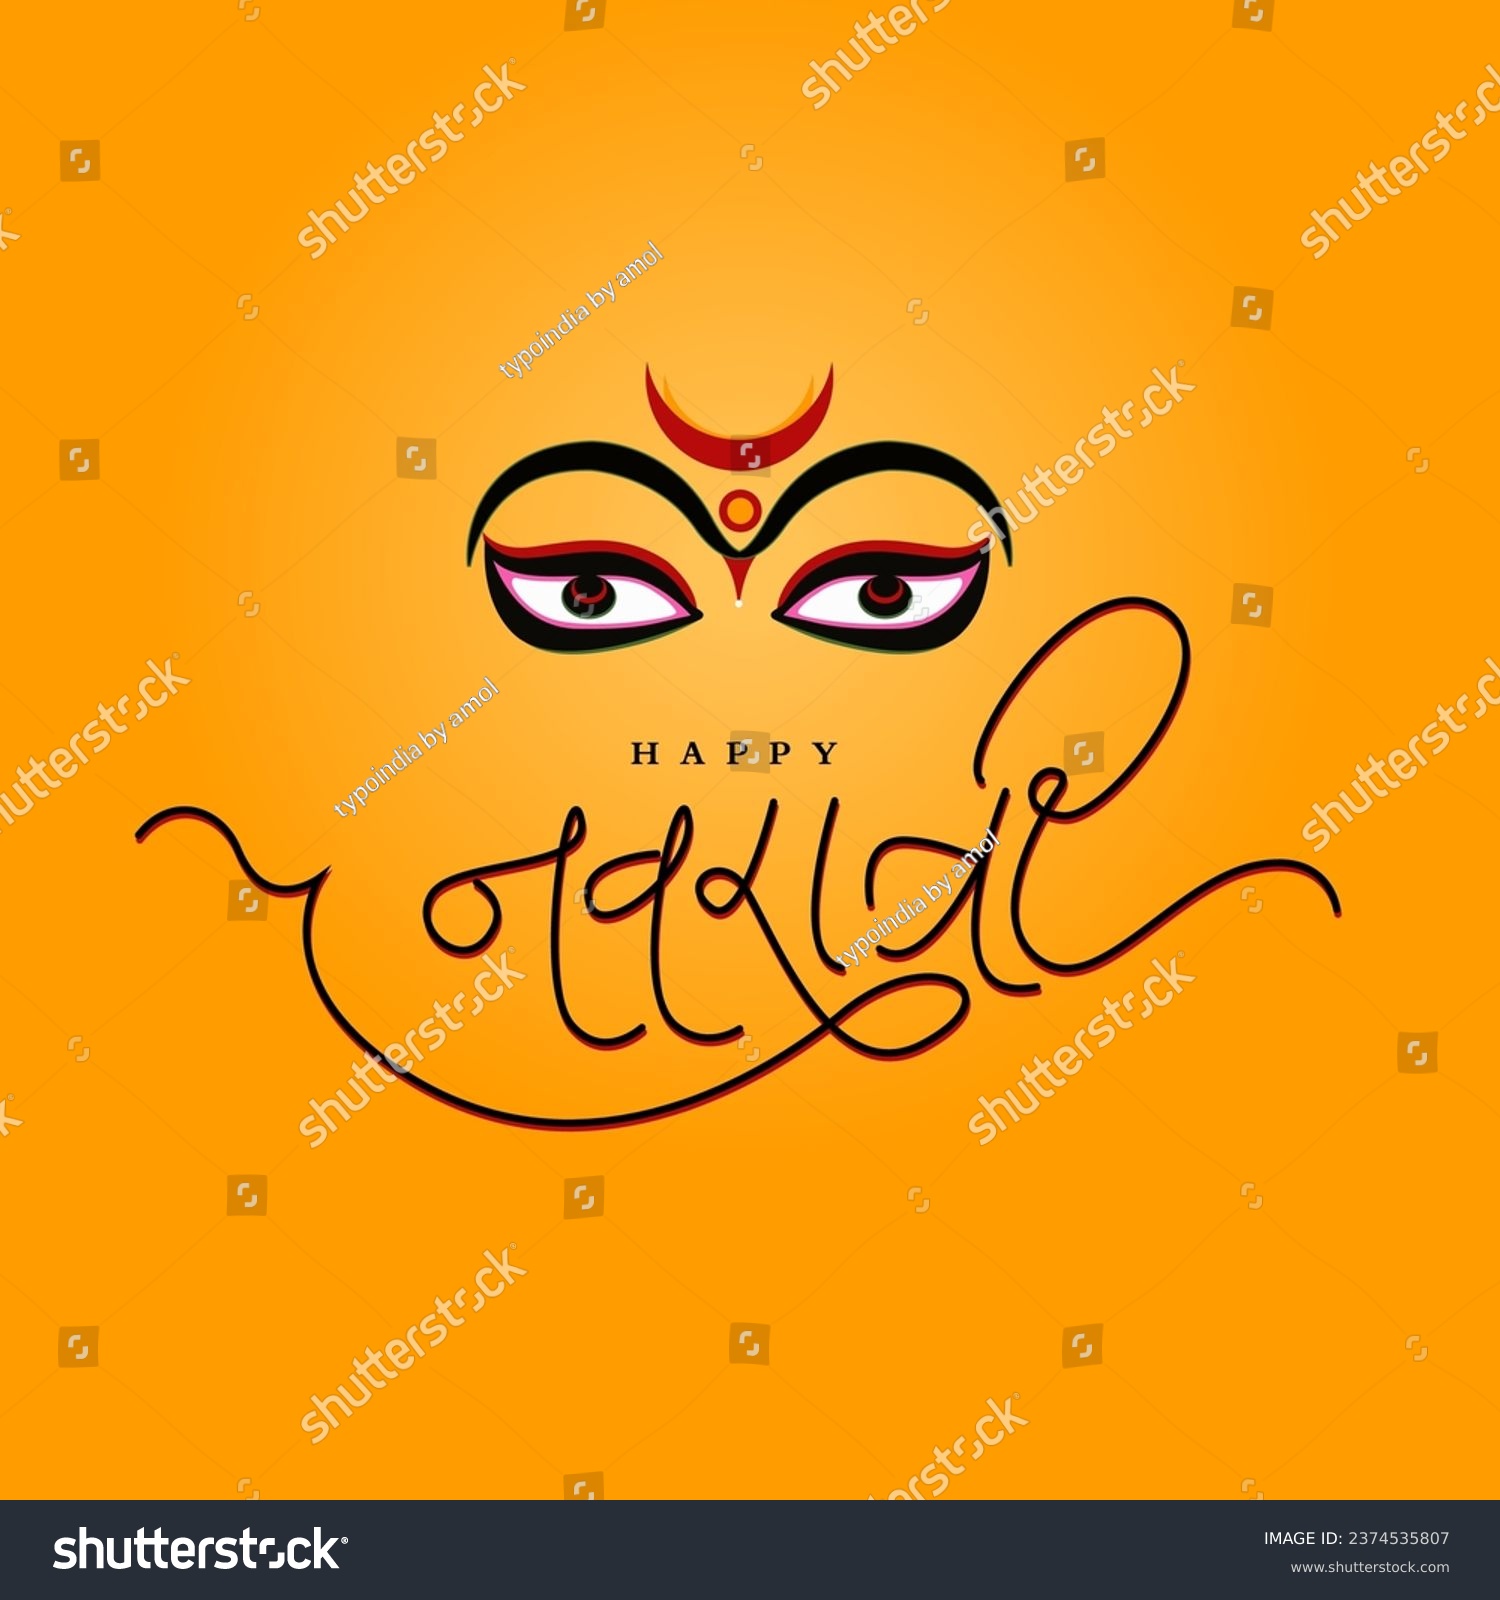 SVG of Happy Navratri written in Hindi calligraphy with Durga face icon. svg